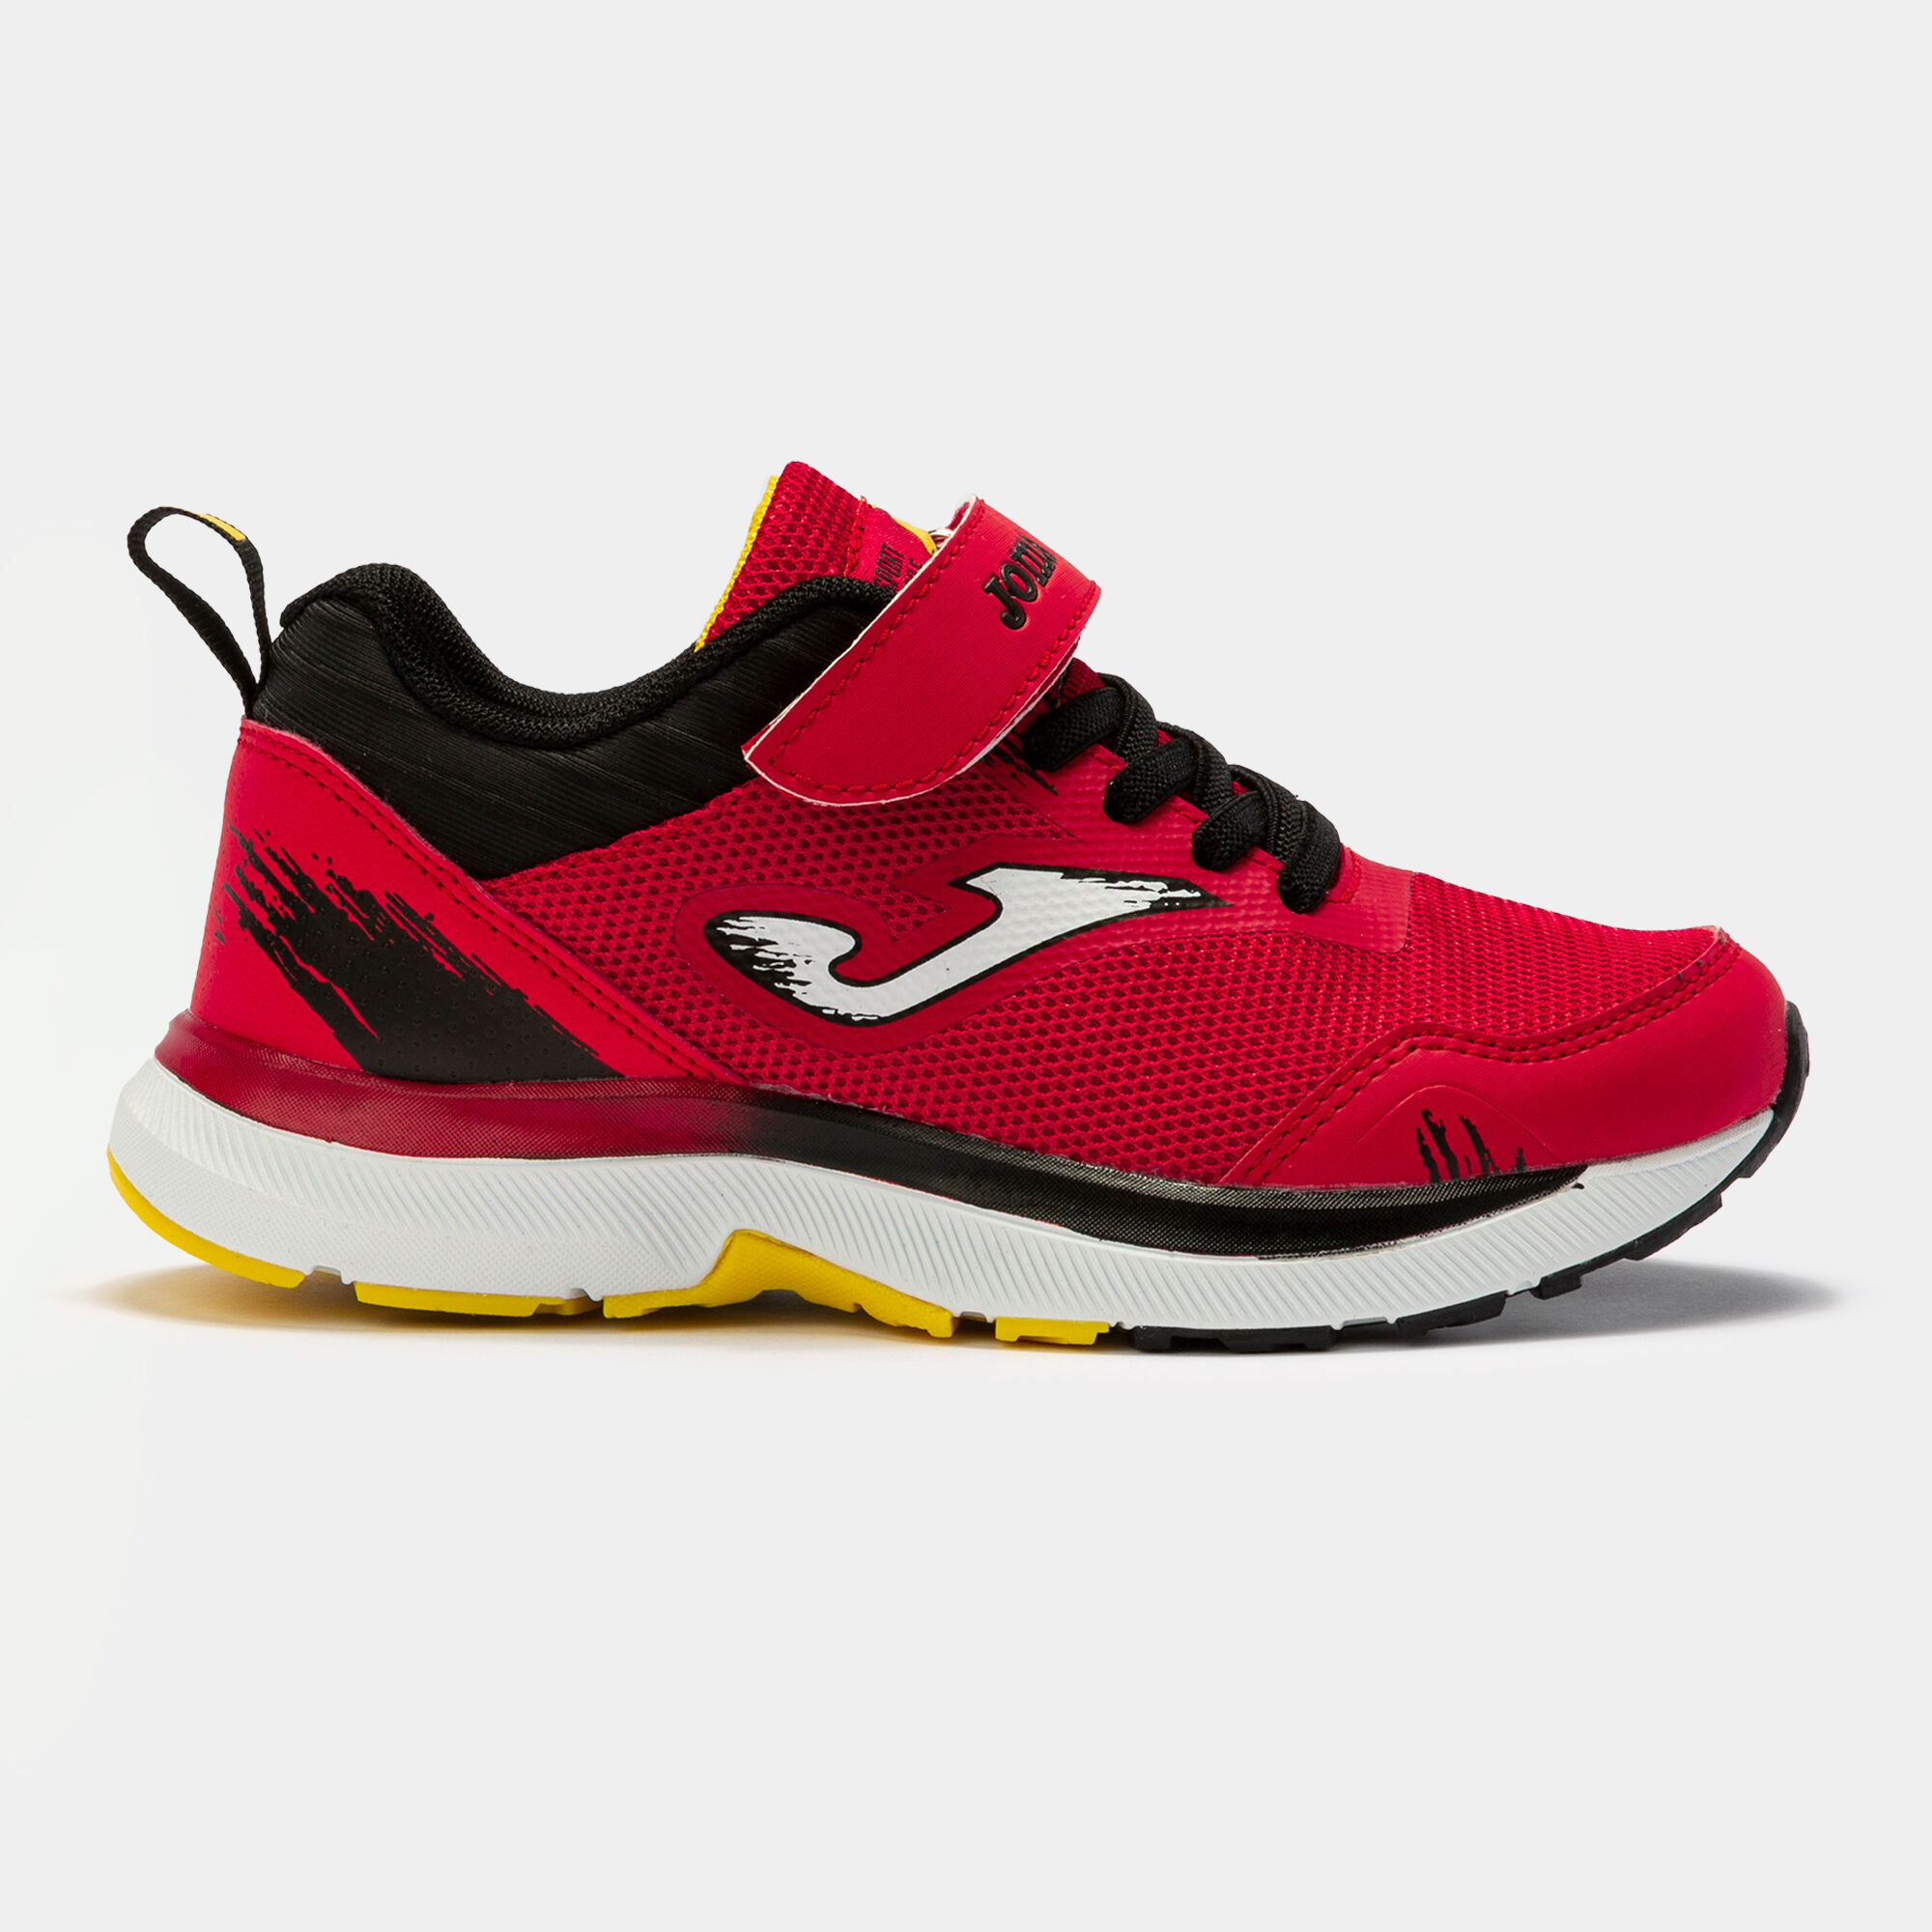 CHAUSSURES CASUAL FAST 22 JUNIOR ROUGE NOIR